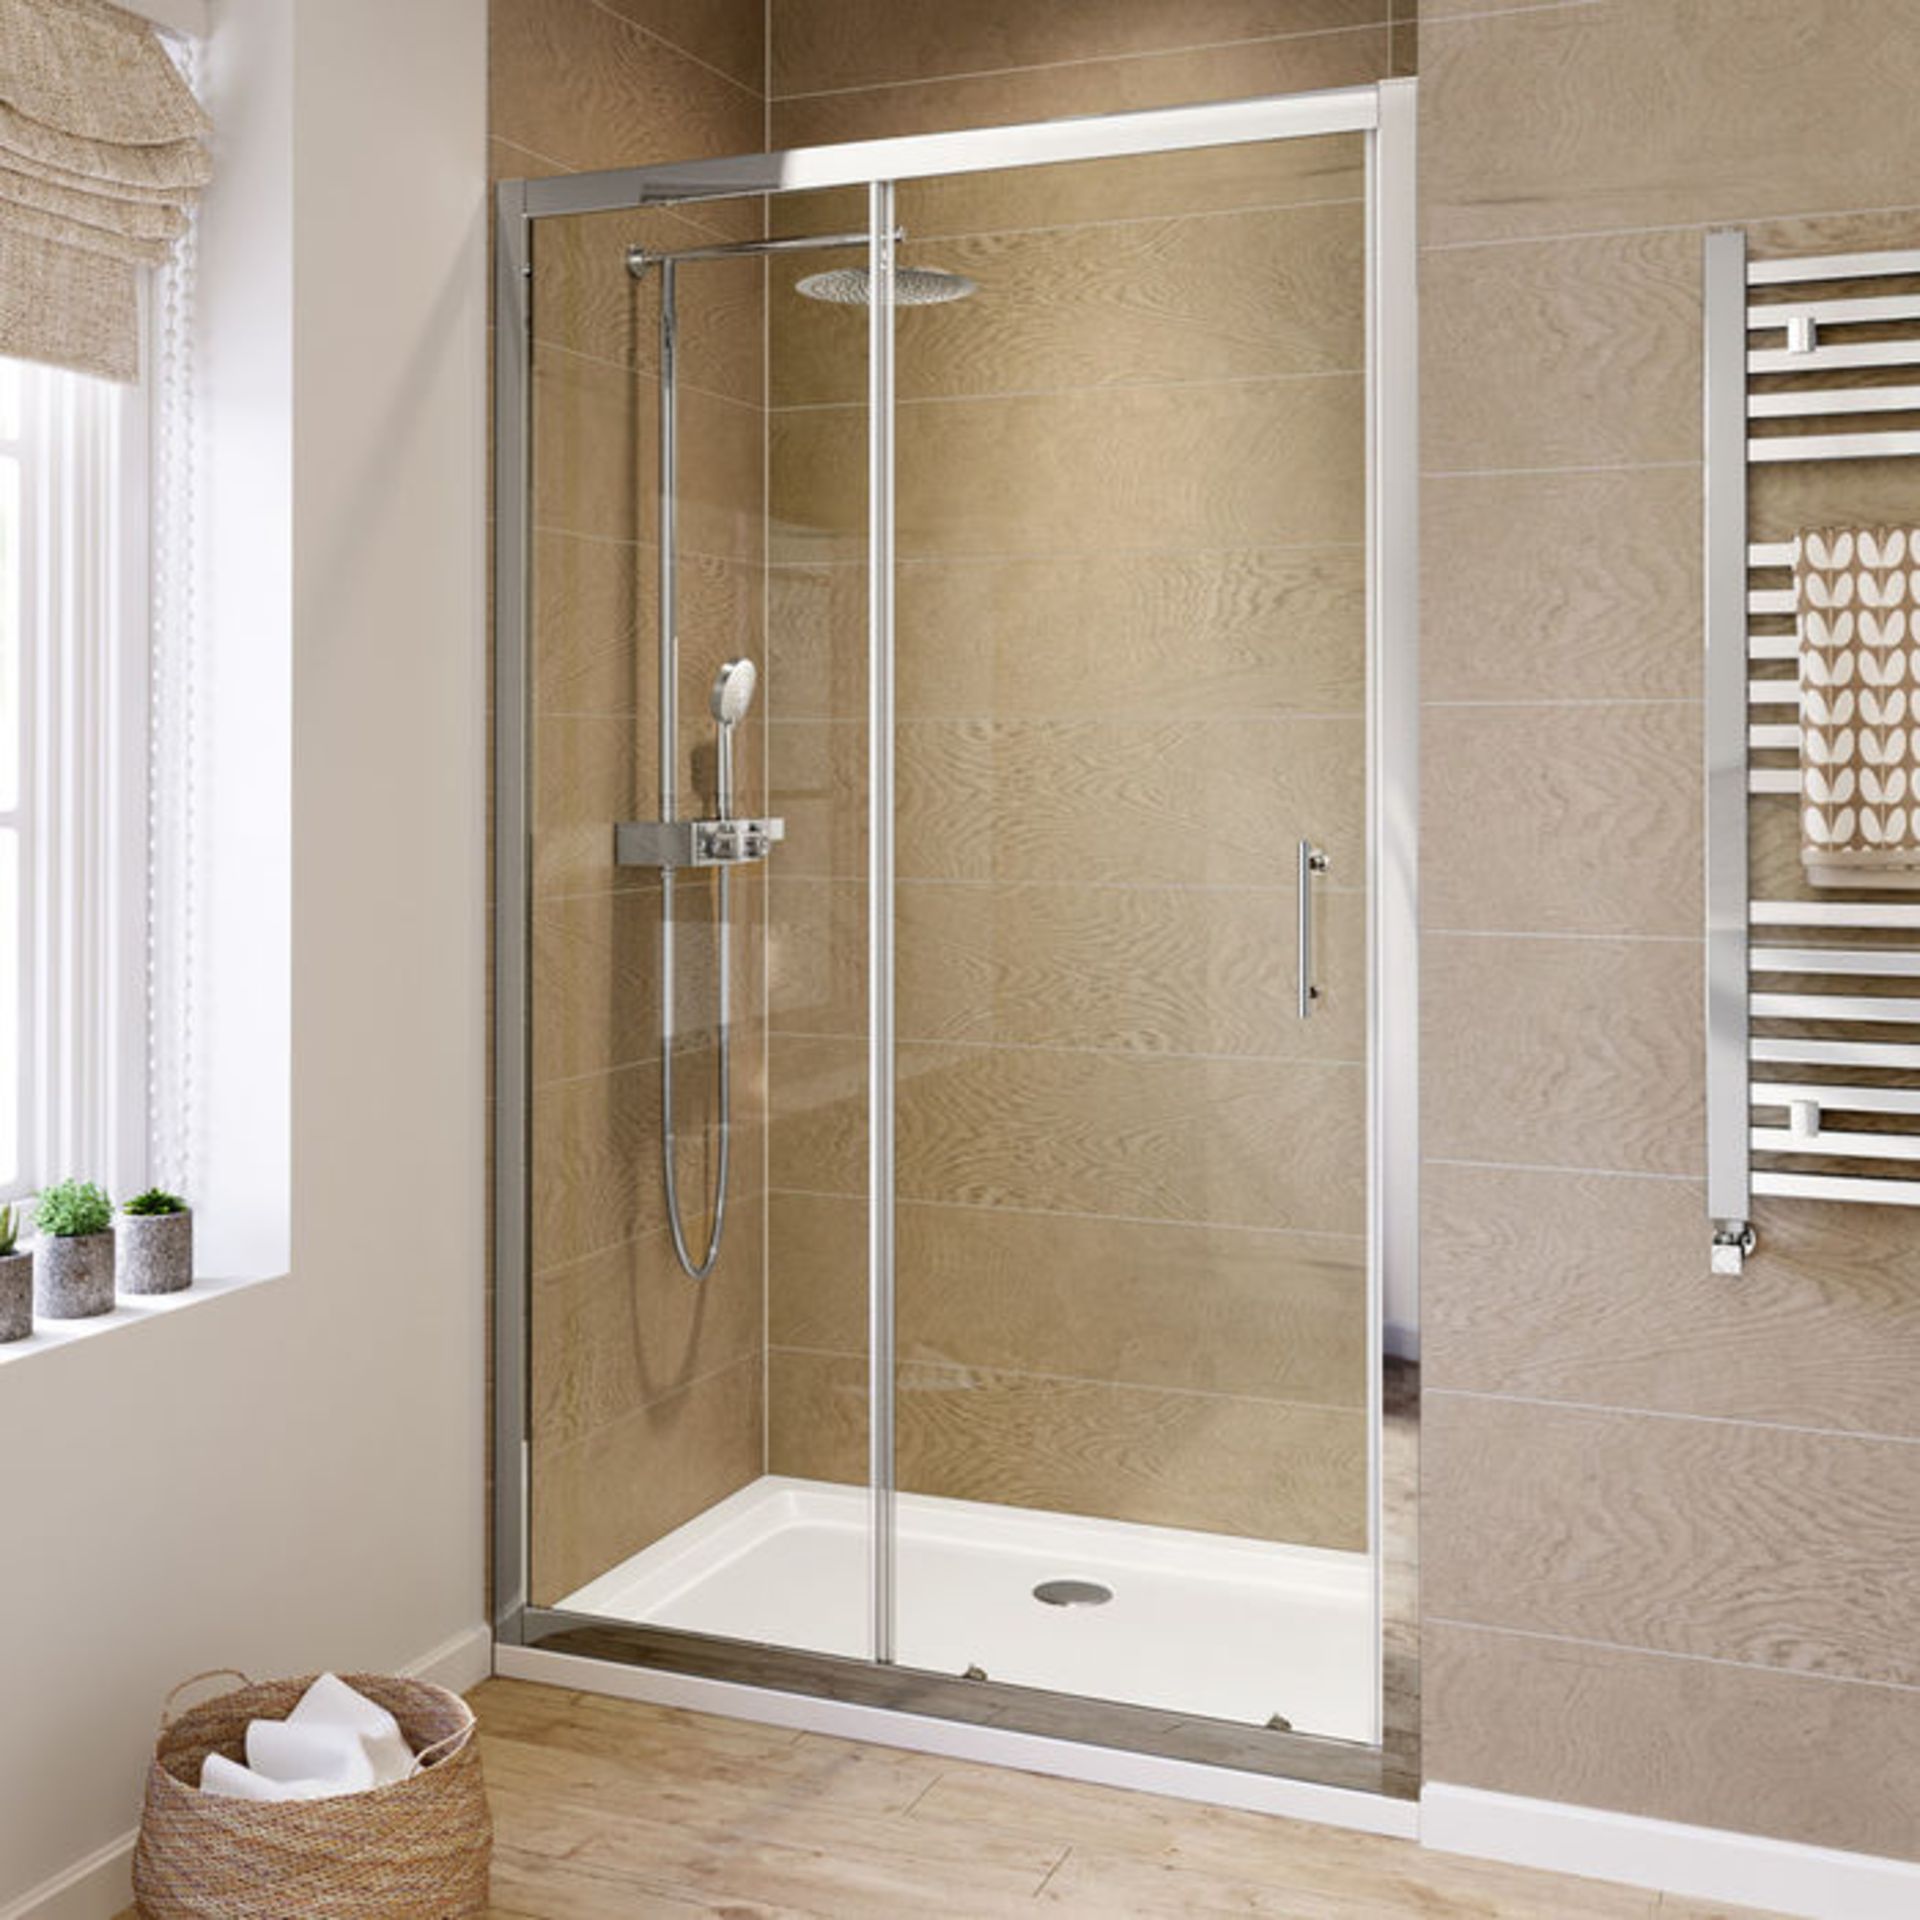 (HS26) 1200mm - 6mm - Elements Sliding Shower Door. RRP £299.99. 6mm Safety Glass Fully waterproof - Image 3 of 4